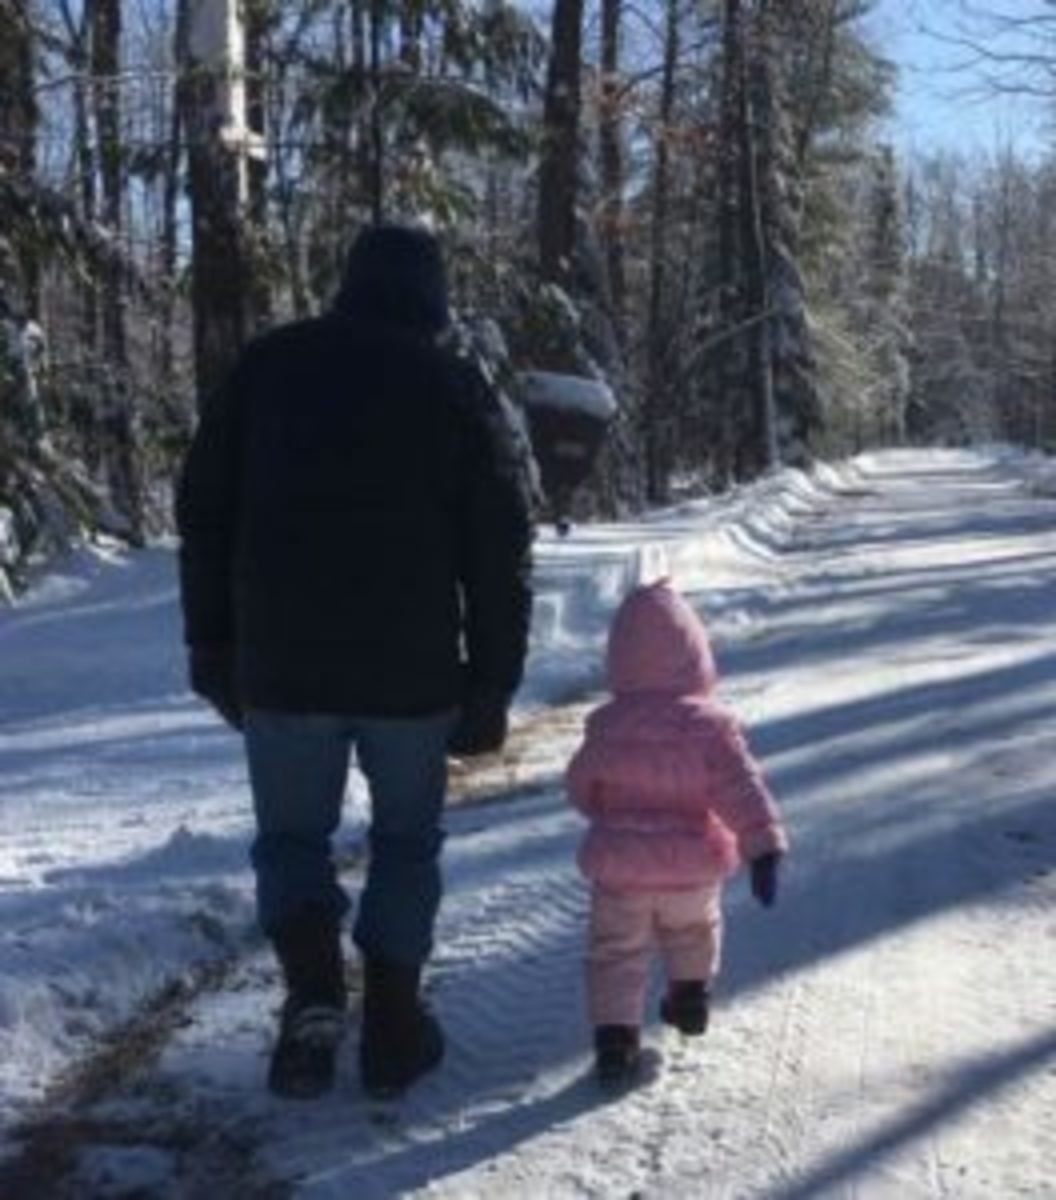 Photo taken from behind of JAG and granddaughter walking in snowy woods.